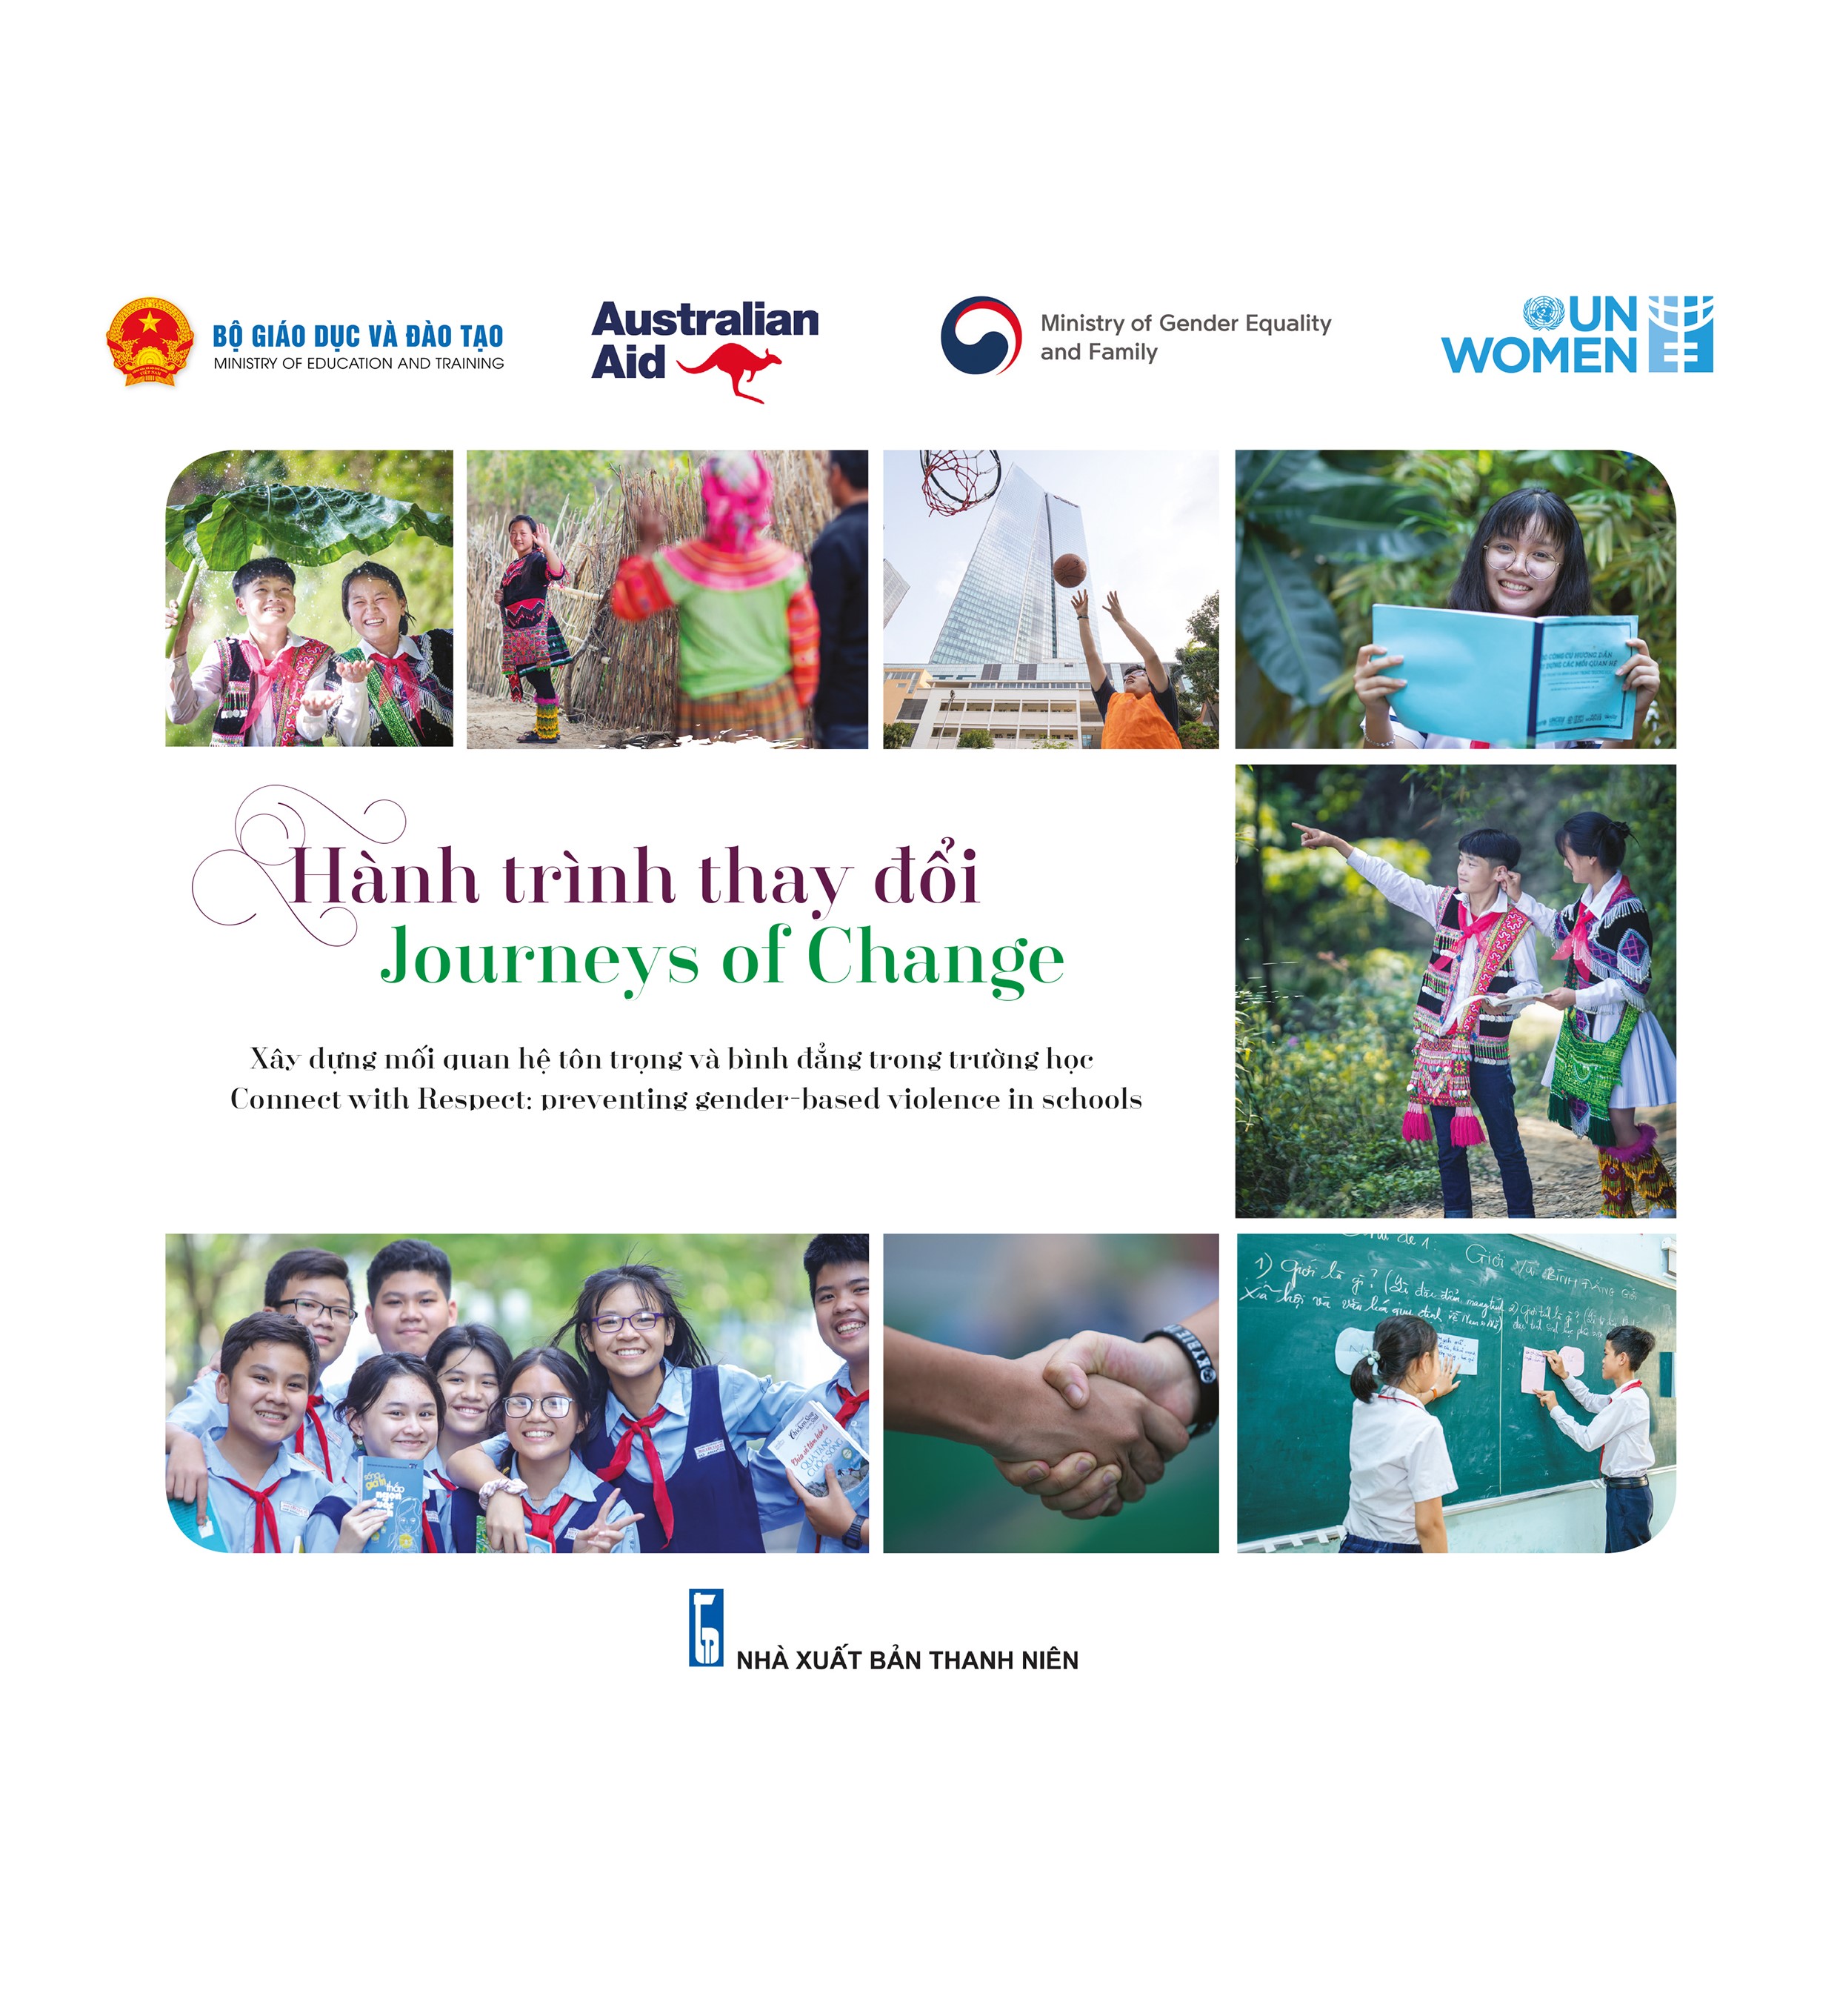  JOURNEYS OF CHANGE - Connect with Respect: preventing gender-based violence in schools